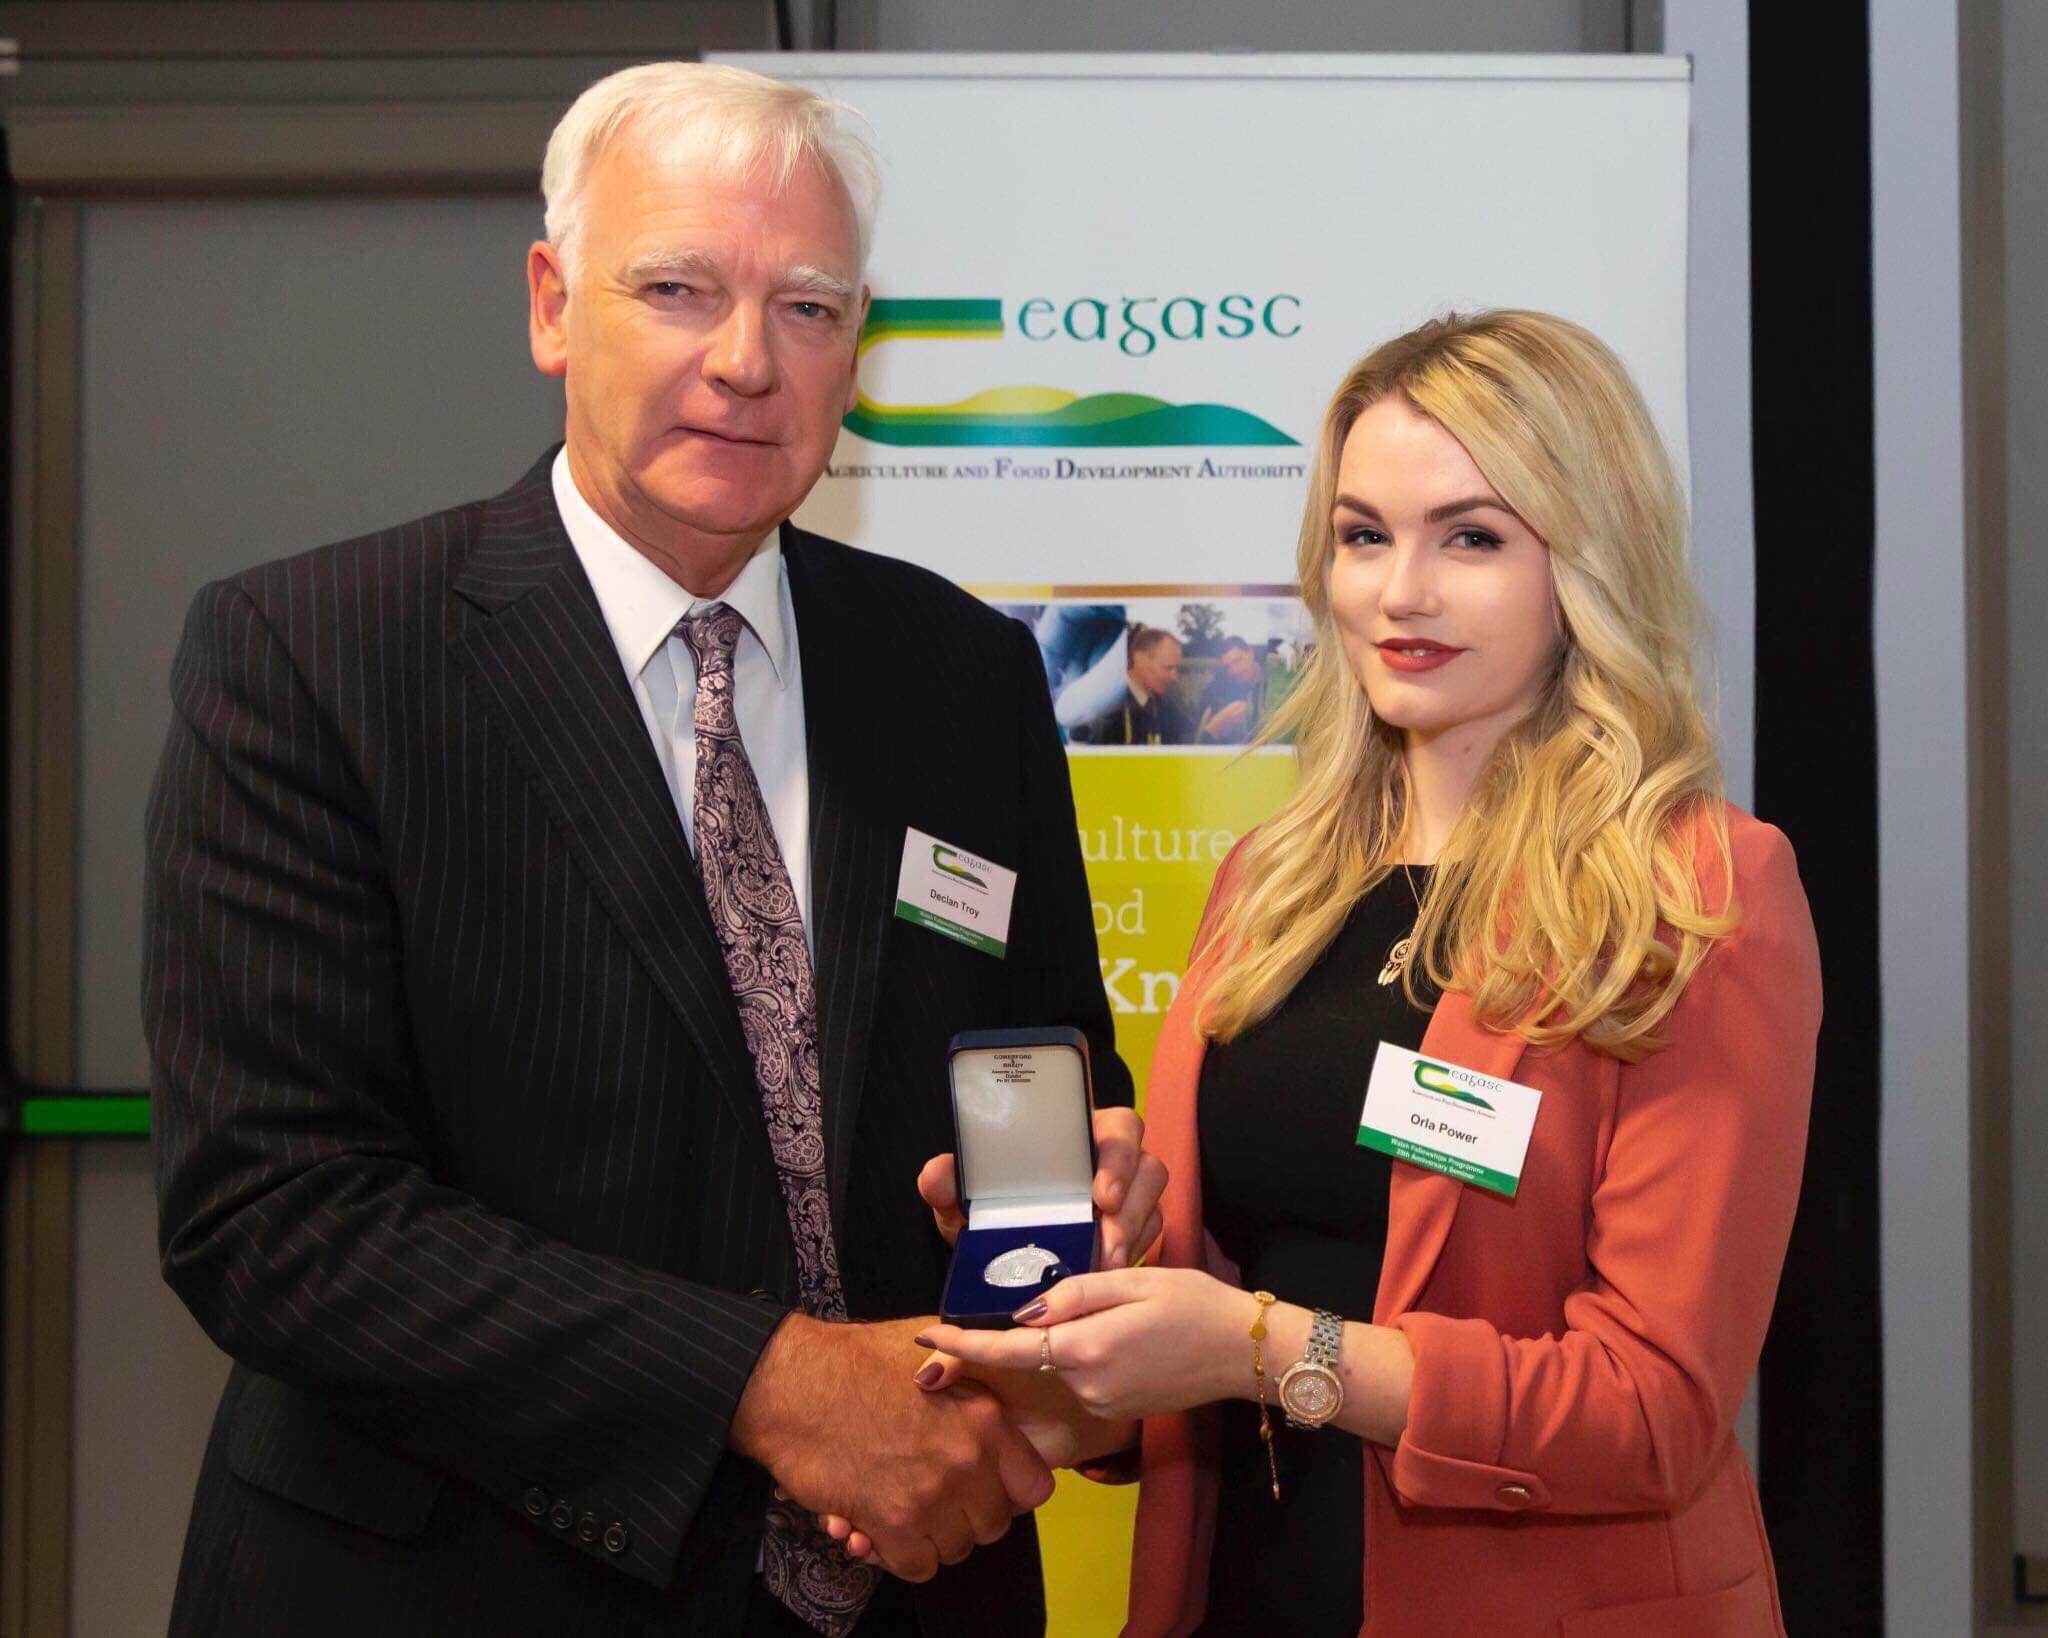 PhD Food Science candidate wins IFSTI medal for Best Food Science and Technology Presentation